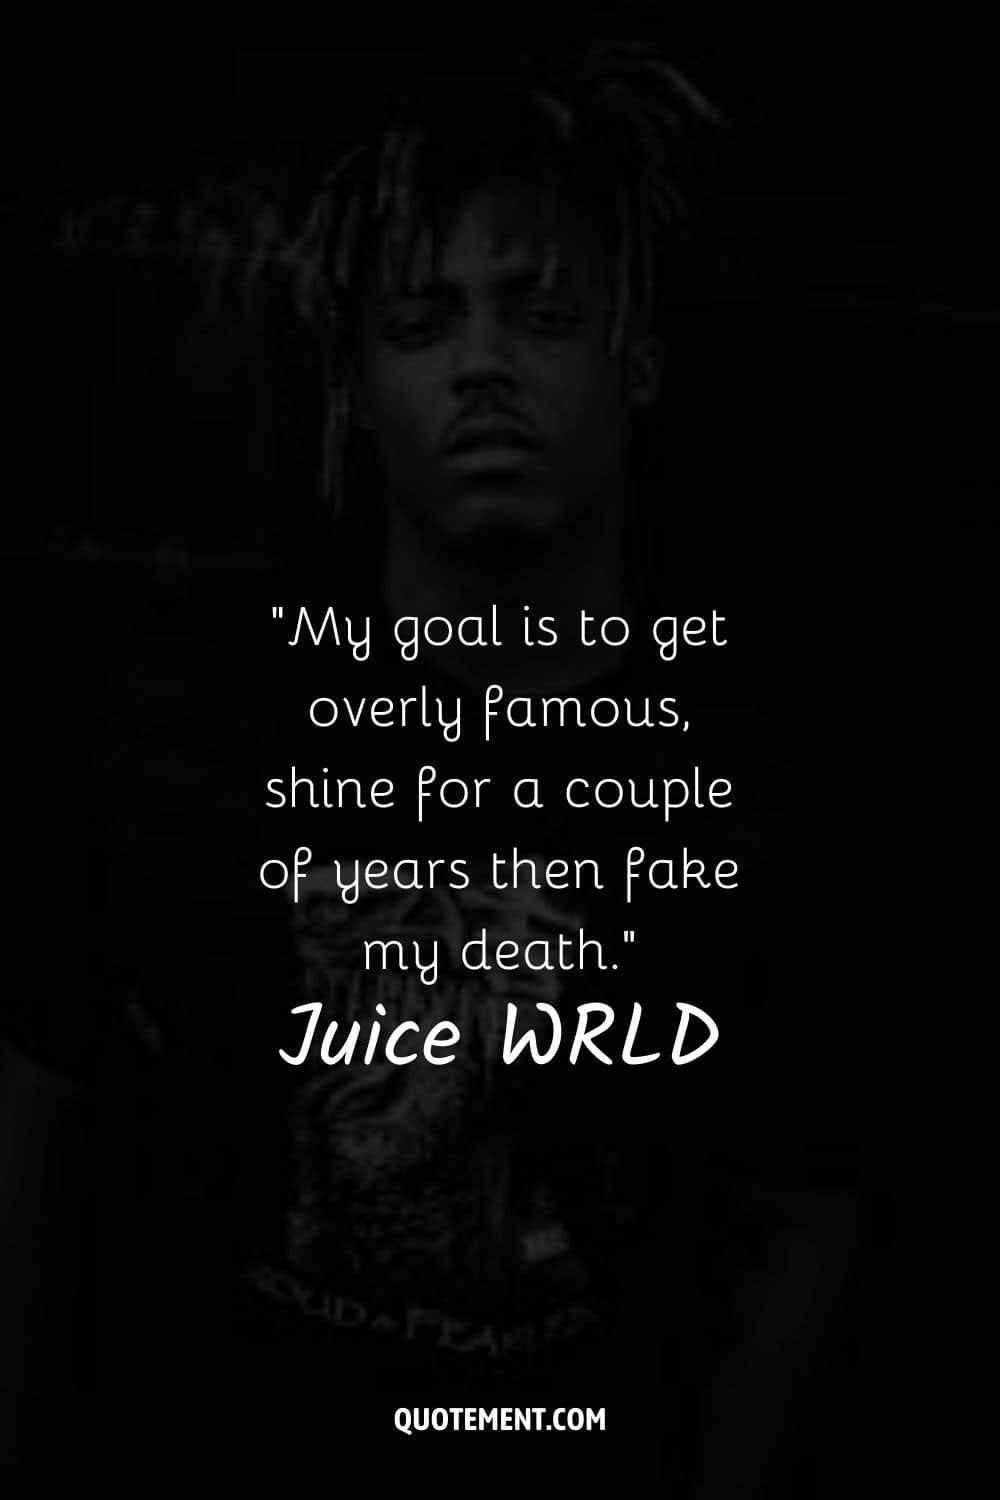 My goal is to get overly famous, shine for a couple of years then fake my death.